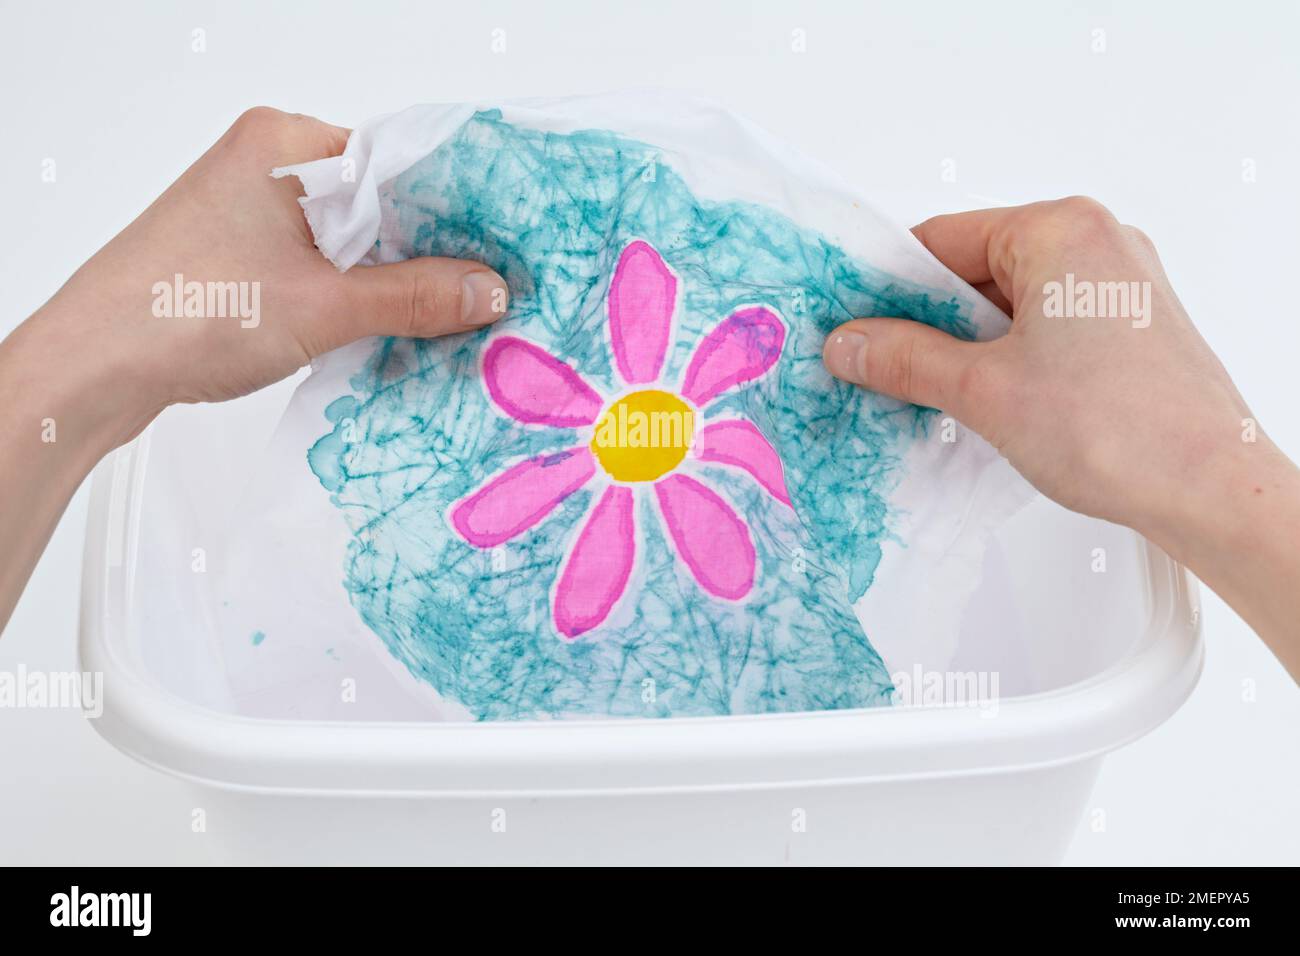 Rinsing batik fabric flower in tub of warm water, close-up Stock Photo